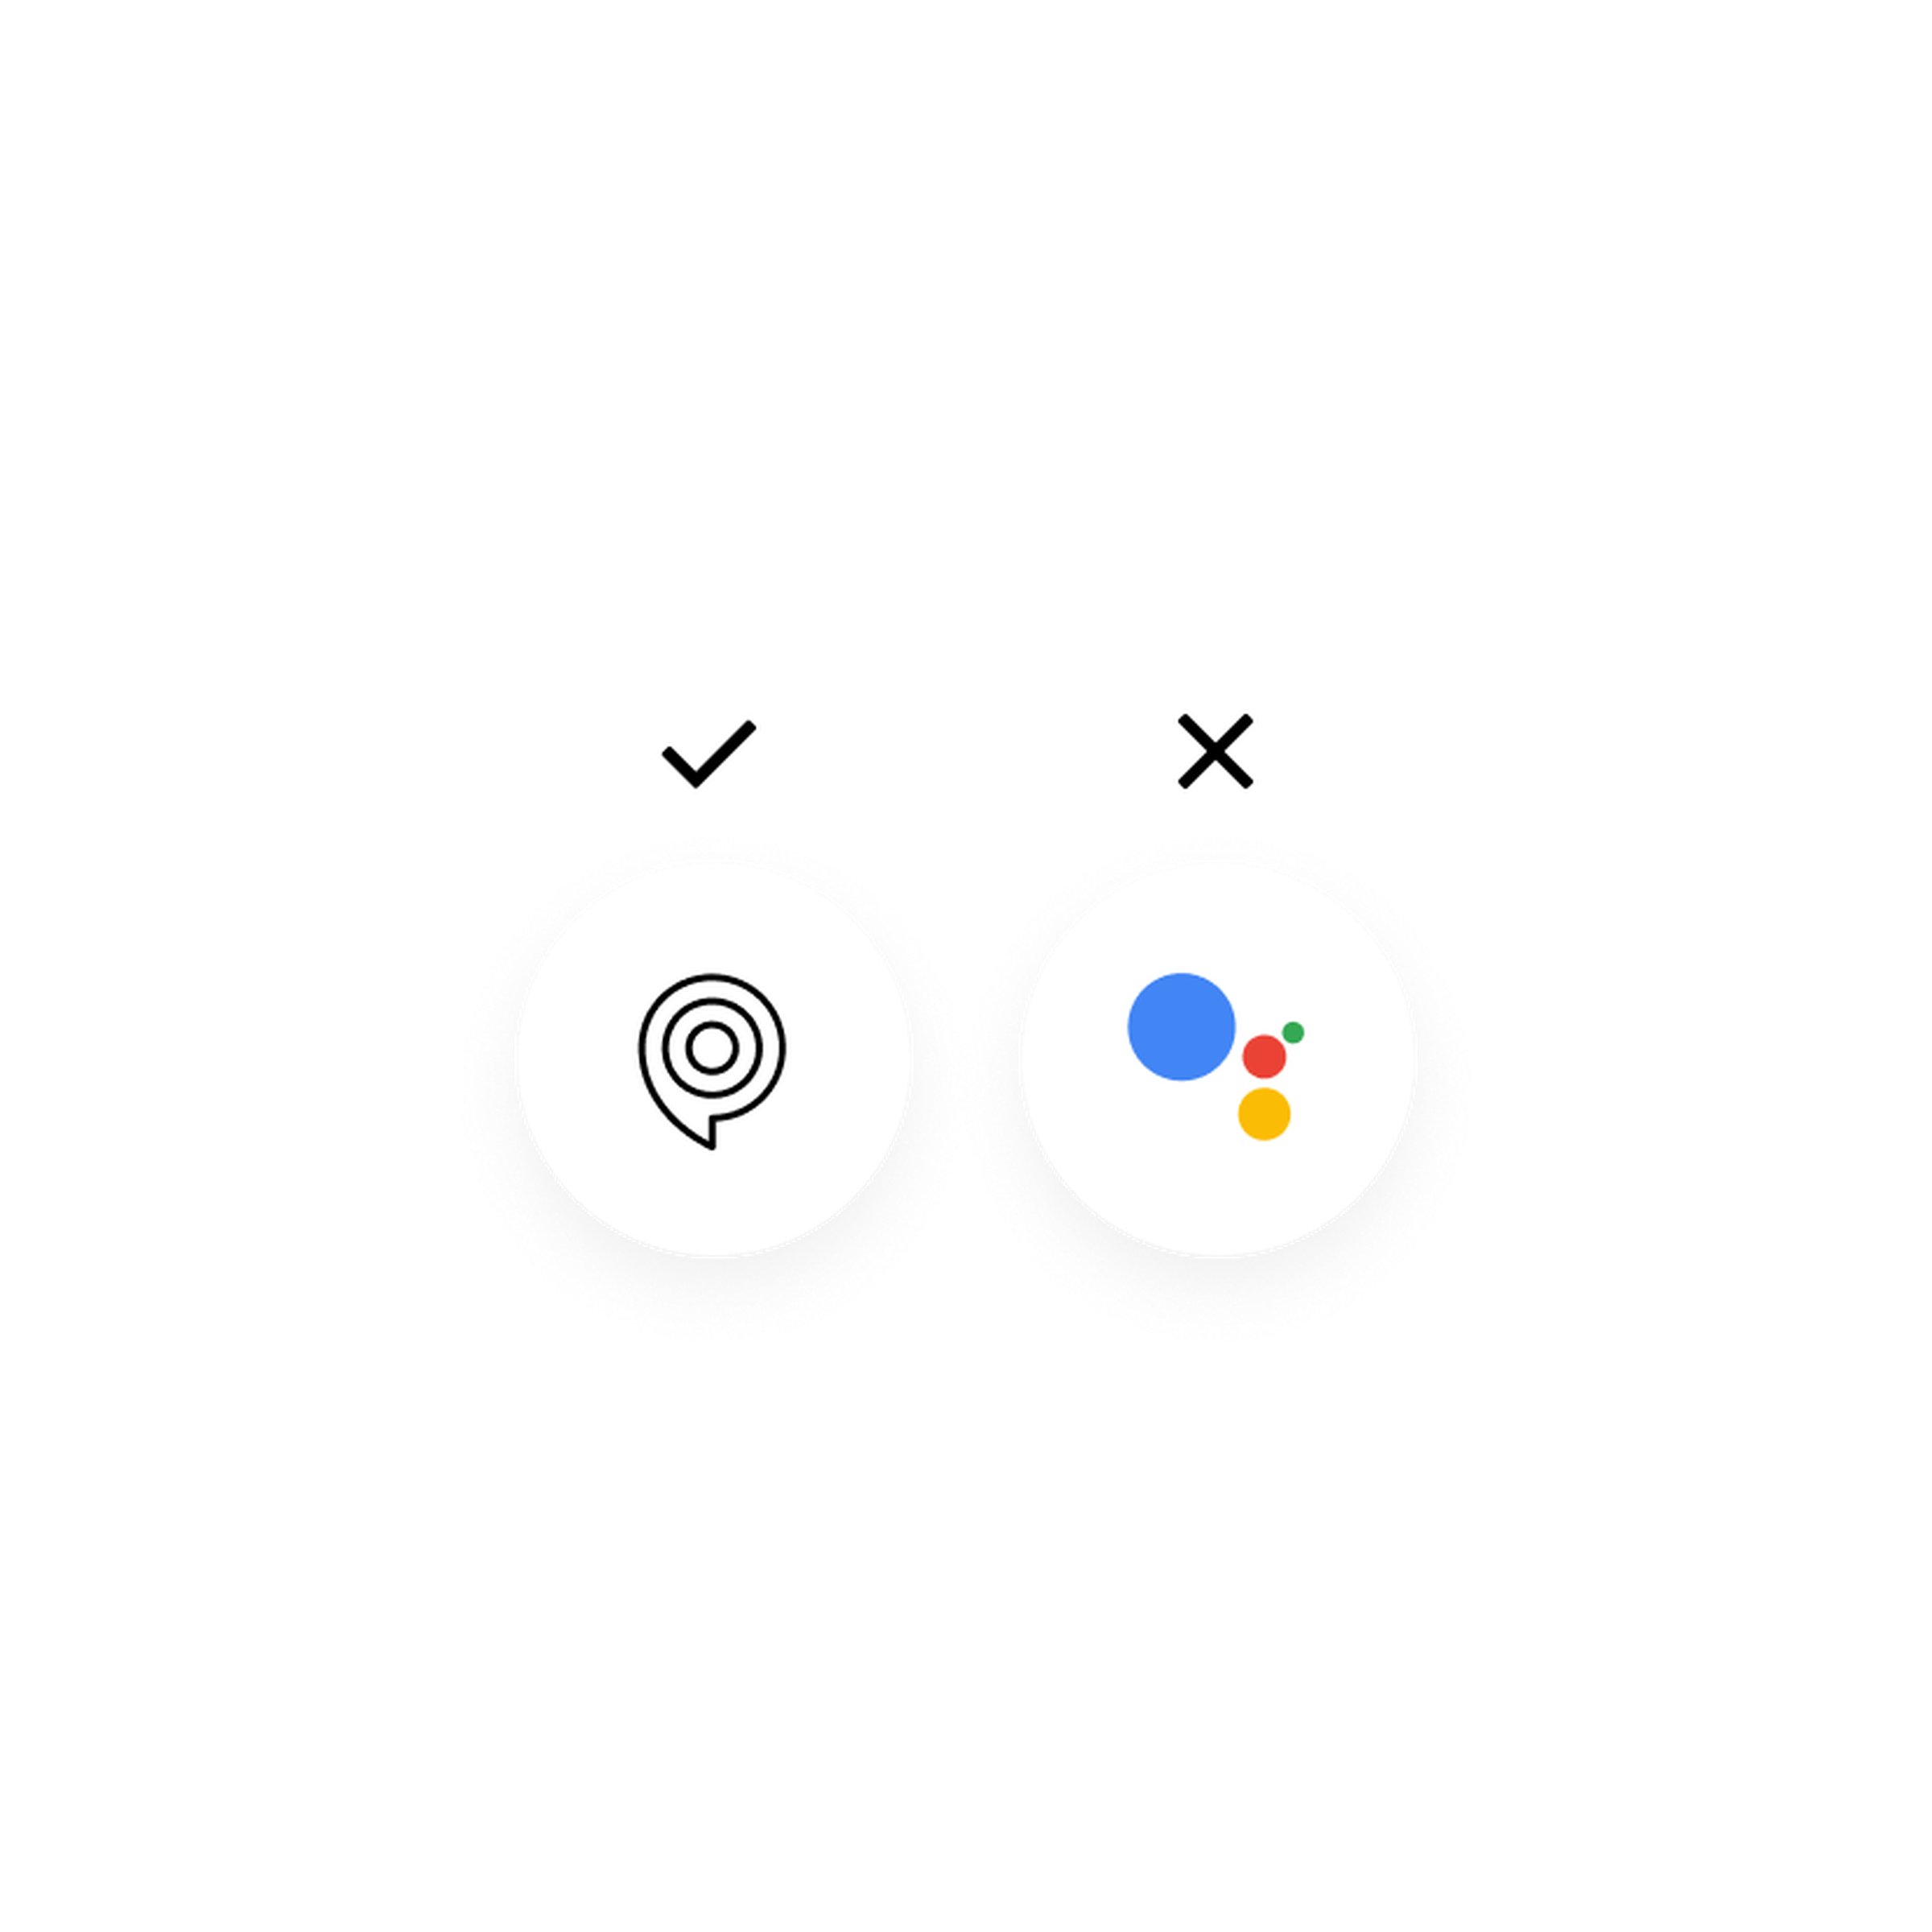 And here’s Sonos’ icon next to the Google Assistant icon.